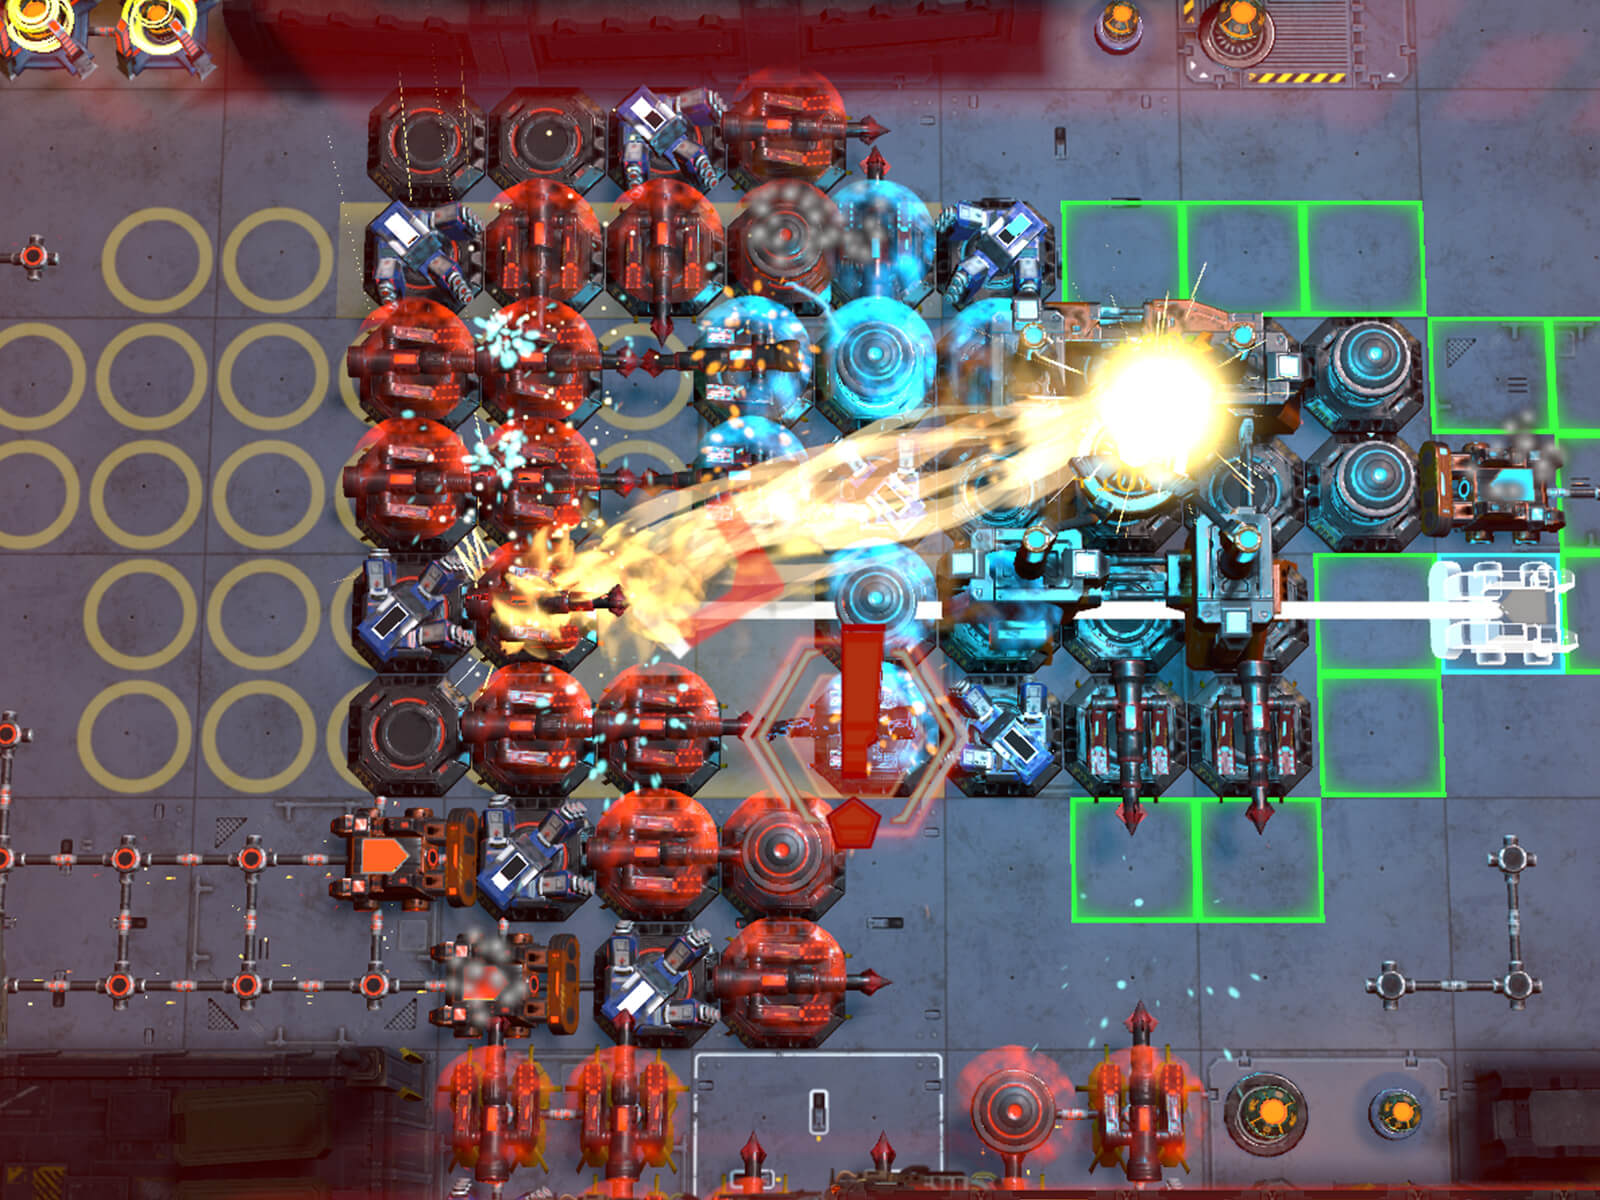 A blue sci-fi structure fires a beam at opposing red buildings in the game Byte Lynx.